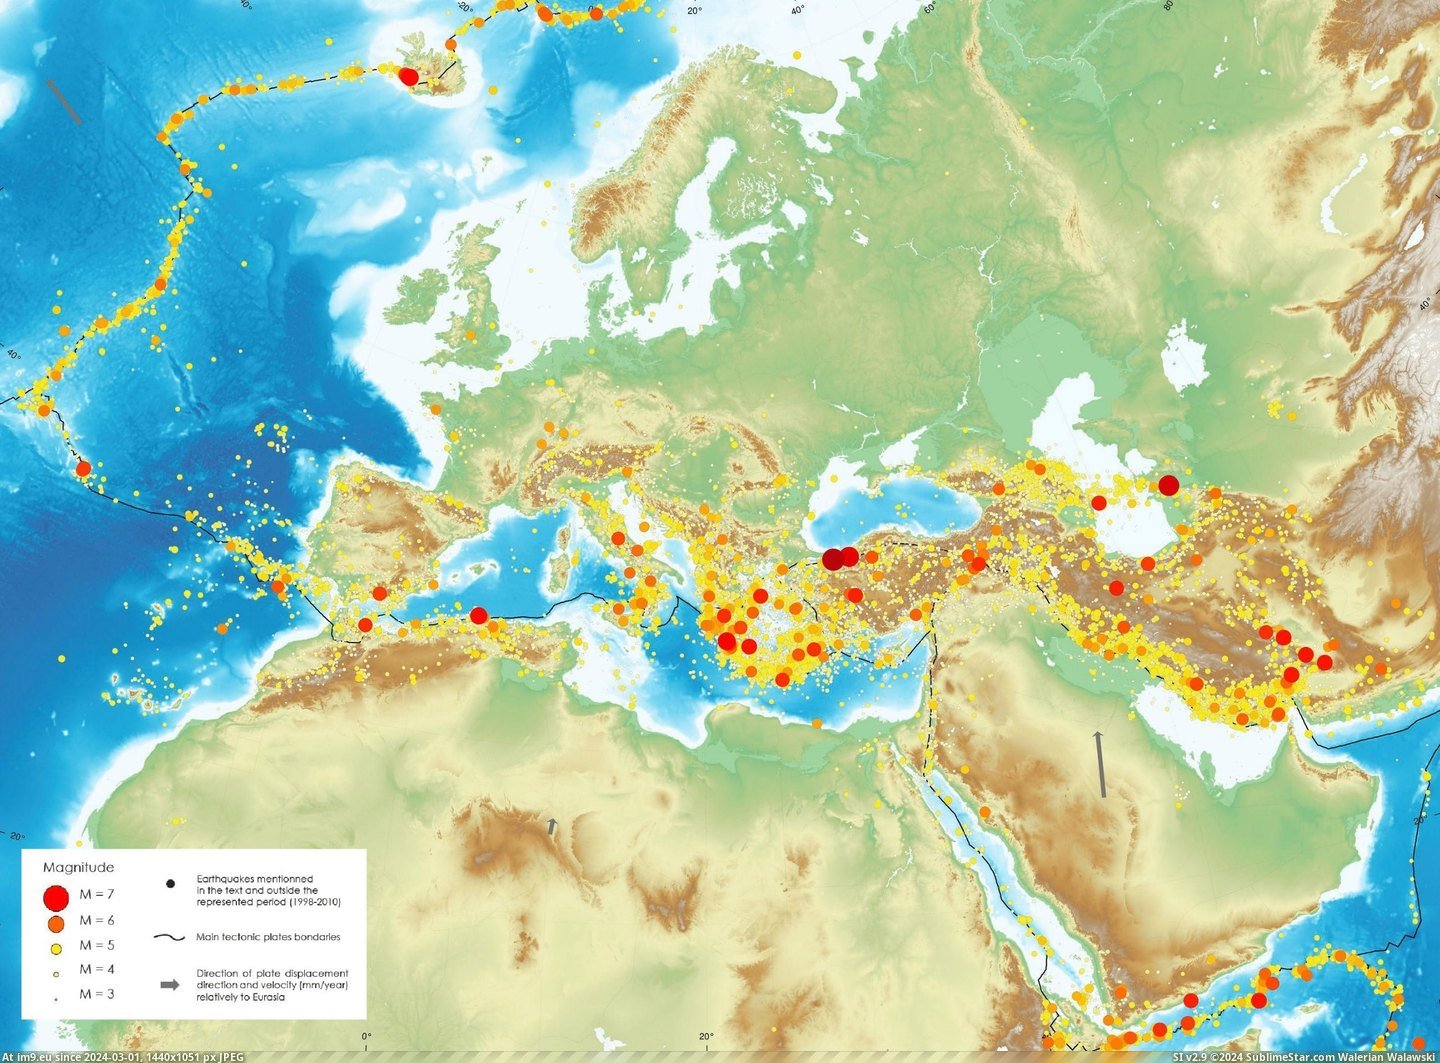 #Map #Europe #Seismic #East #Hazard [Mapporn] Seismic hazard map of Europe and Middle East [2598x1908] Pic. (Image of album My r/MAPS favs))